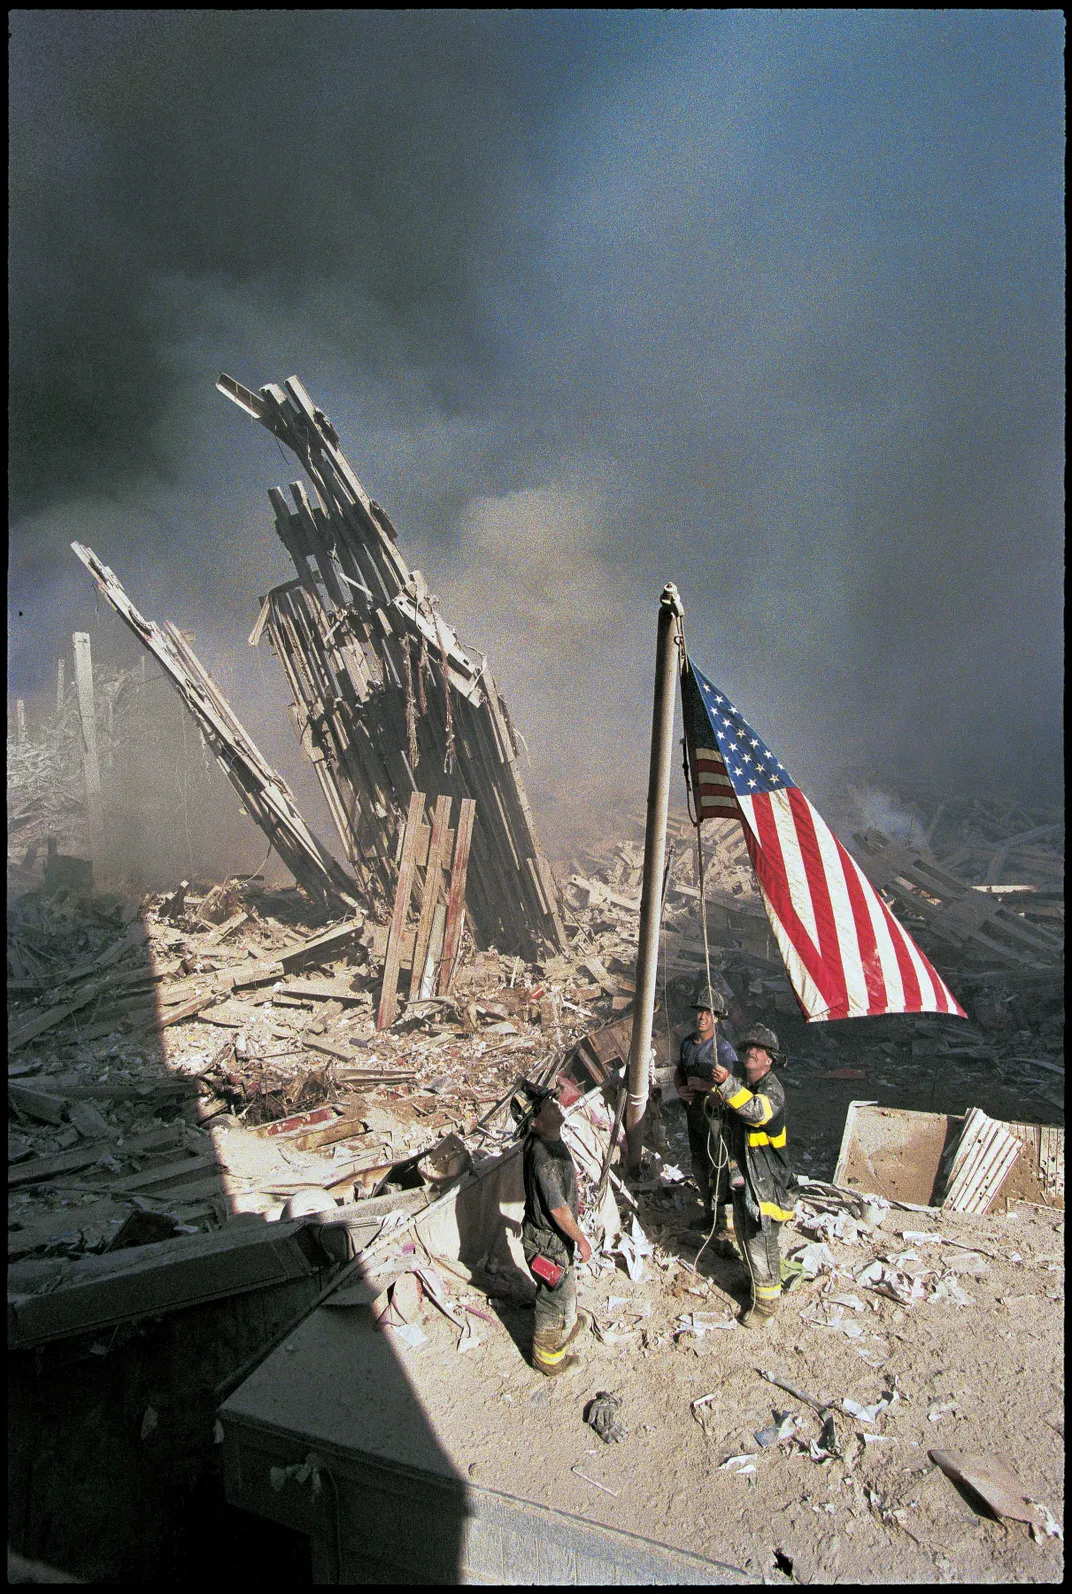 A vertical view of the scene, where the flag's bright red and blue colors stand out brightly against the yellow of the firefighters striped jackets and the muted smoke behind